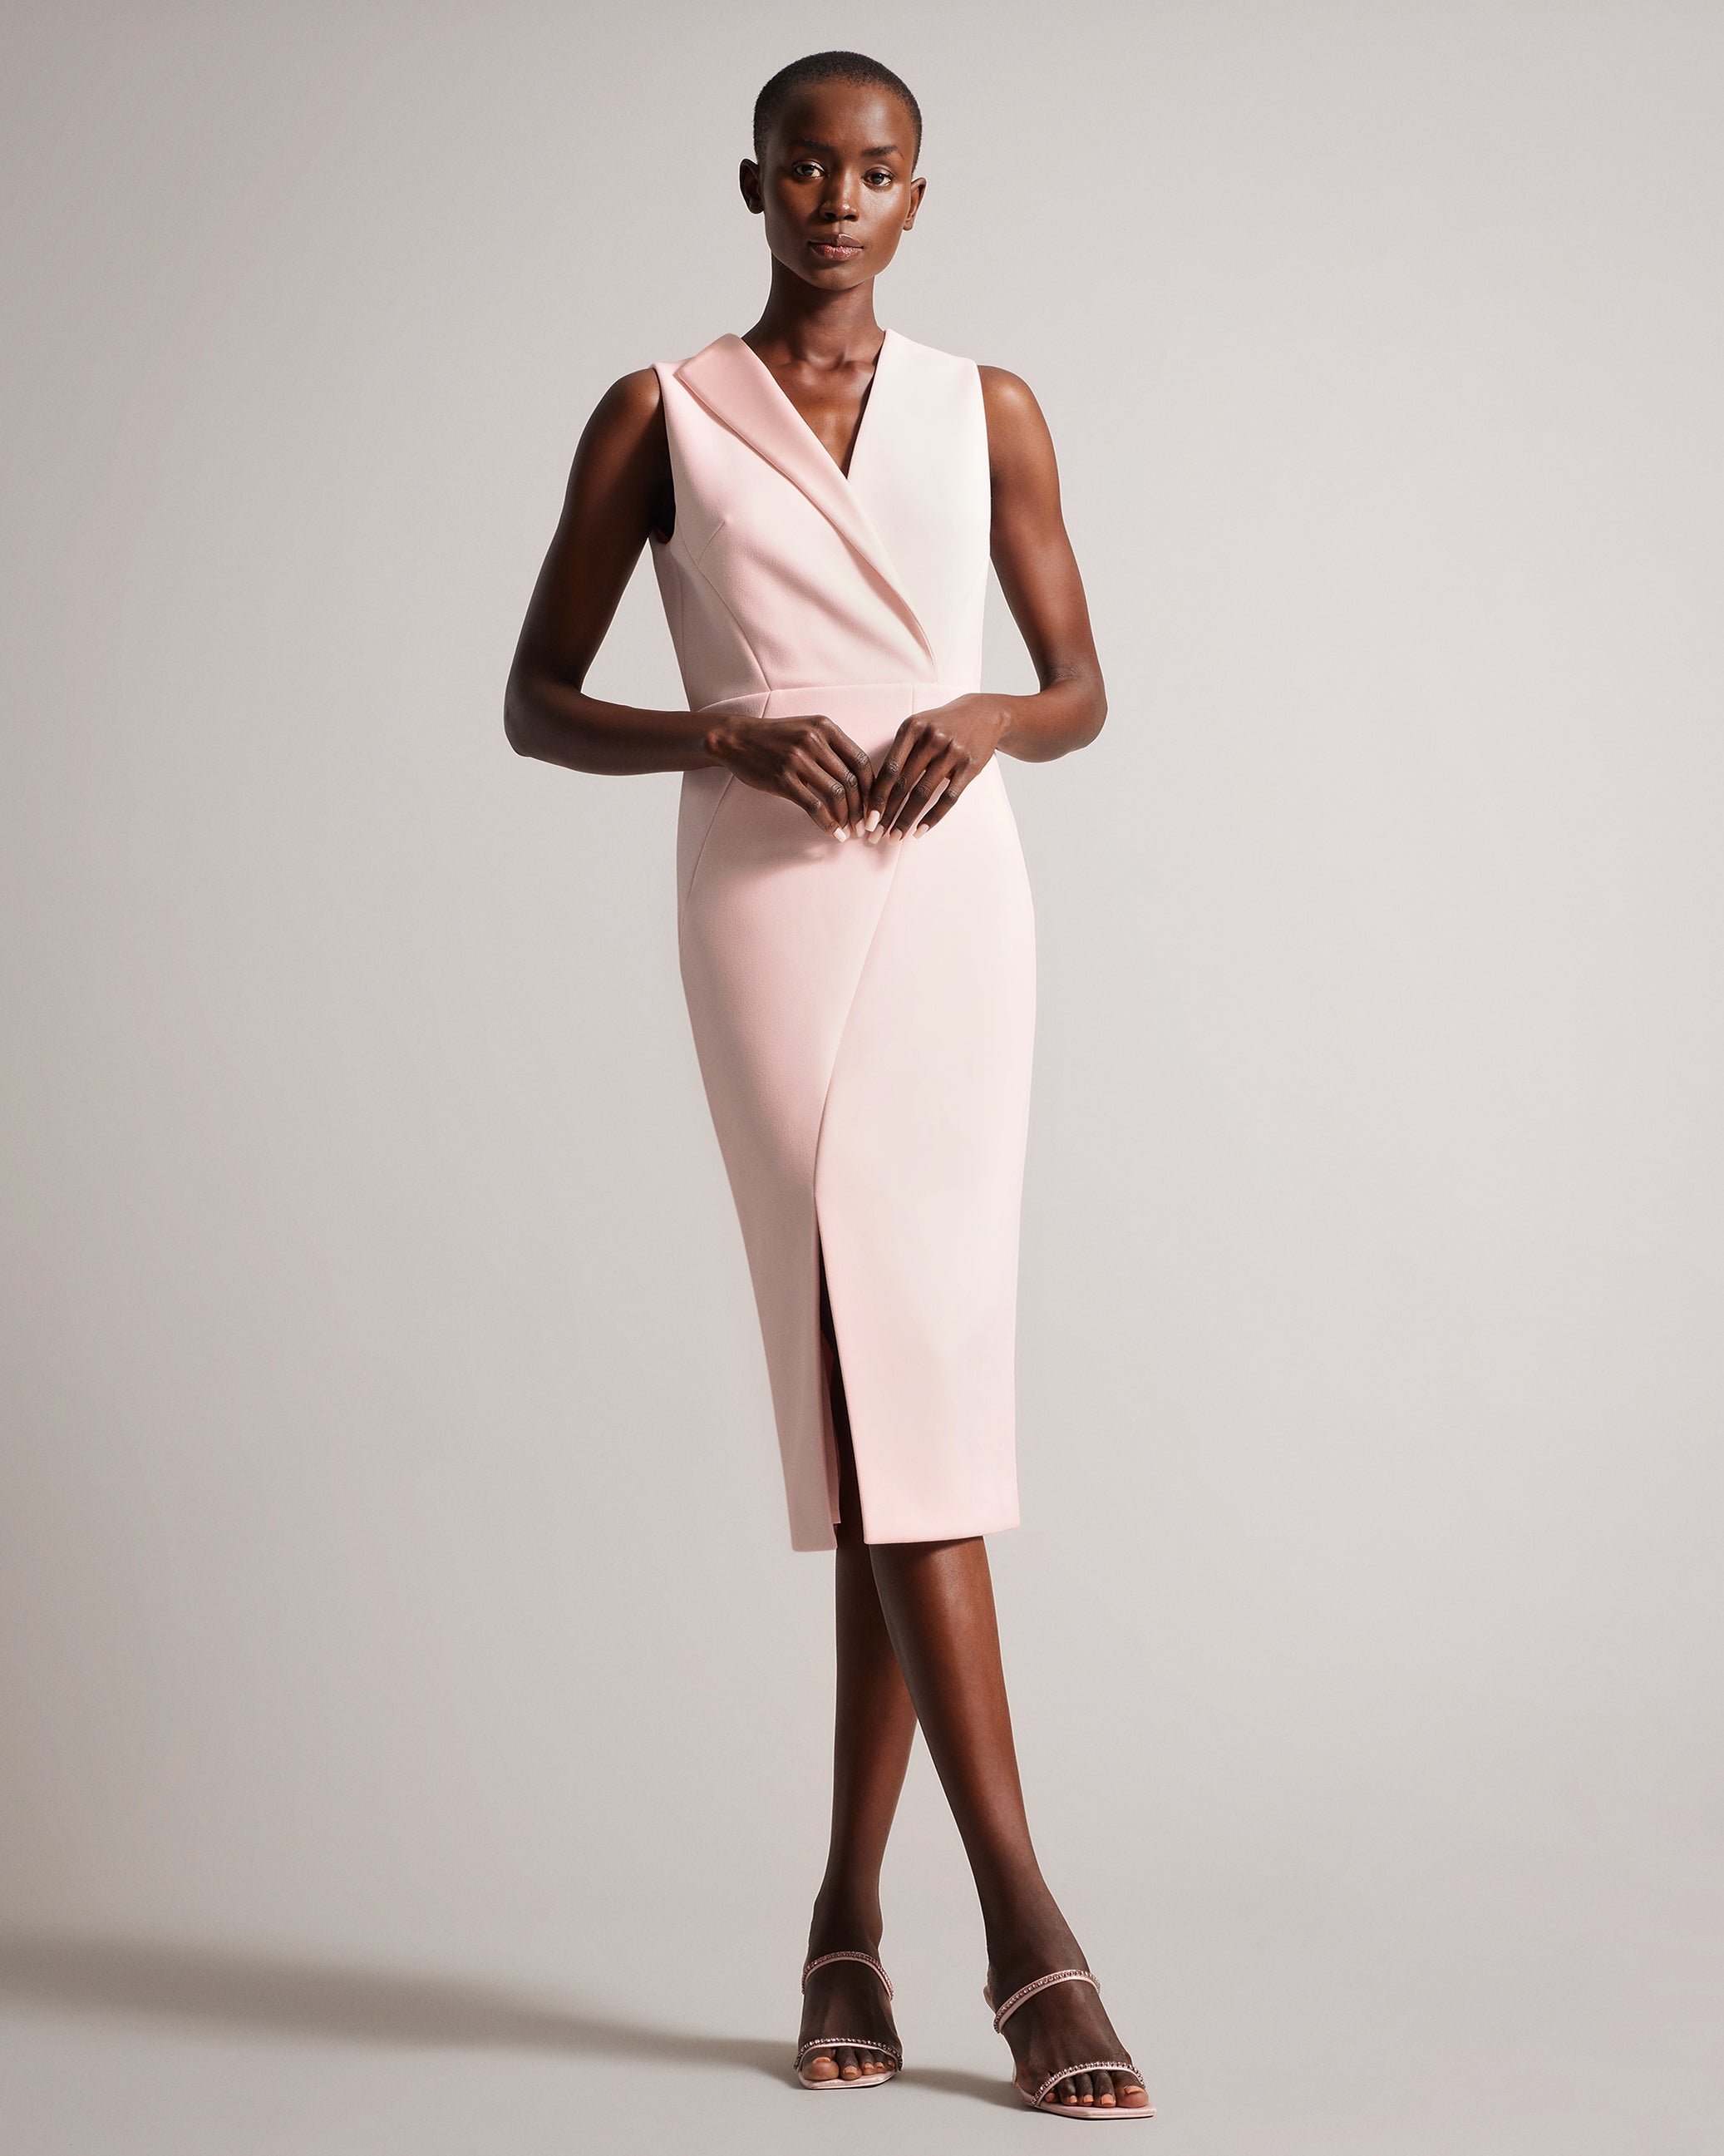 Women's Landing Page – Ted Baker, United States